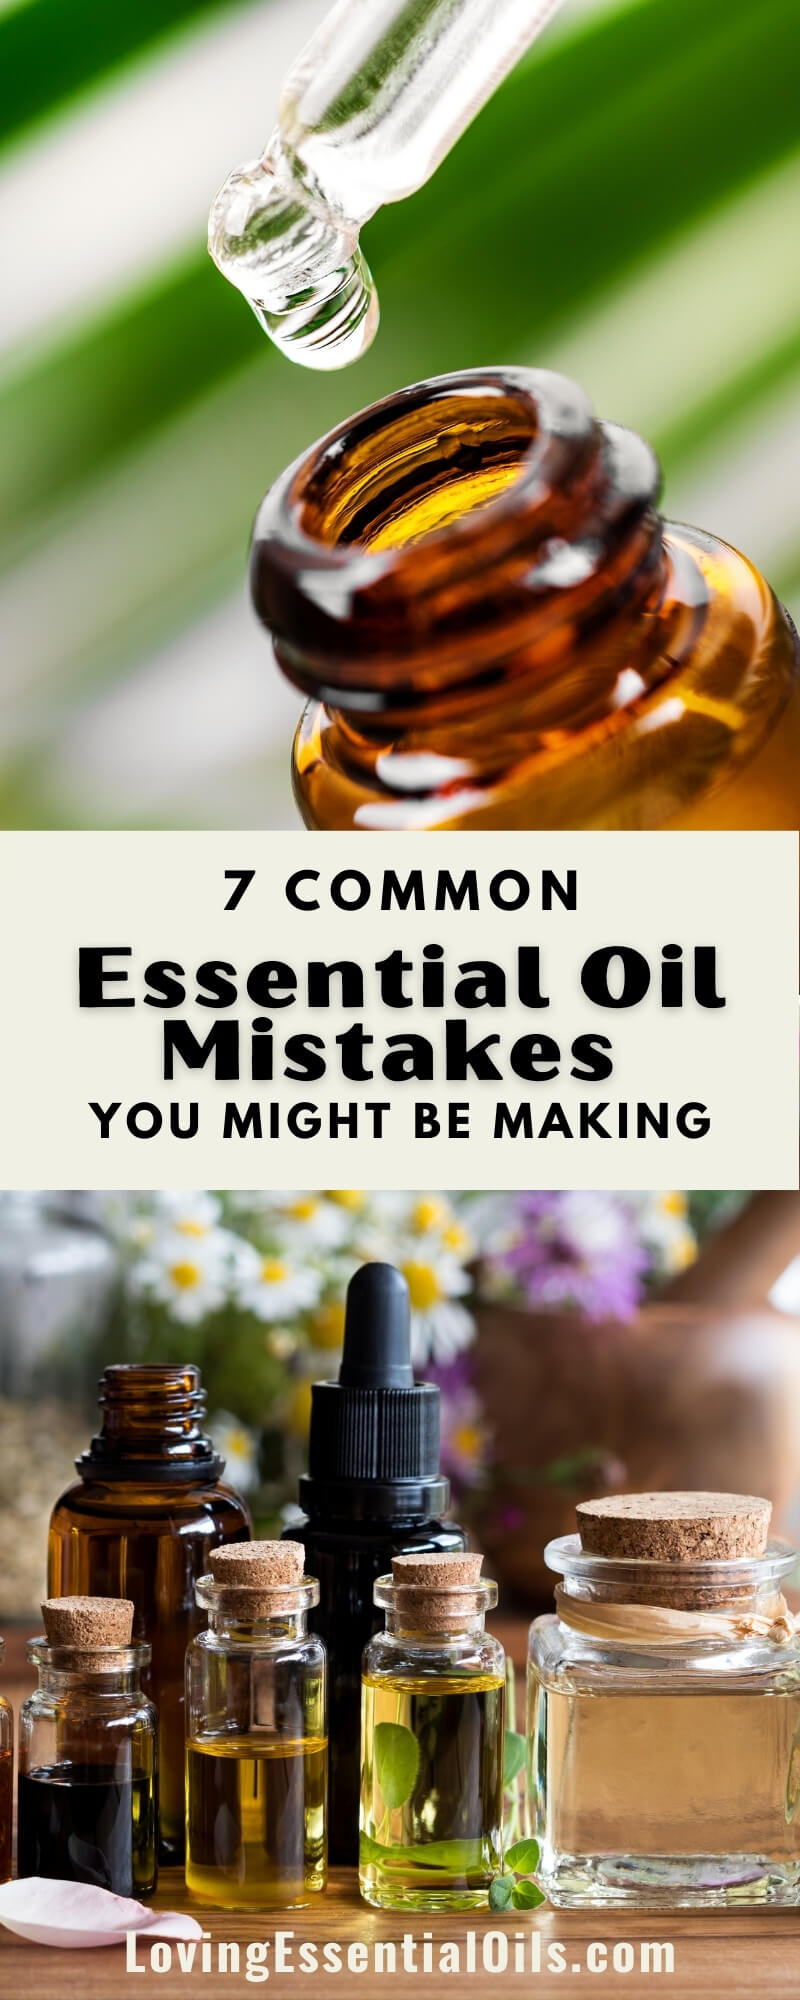 Essential Oil Safety Mistakes by Loving Essential Oils